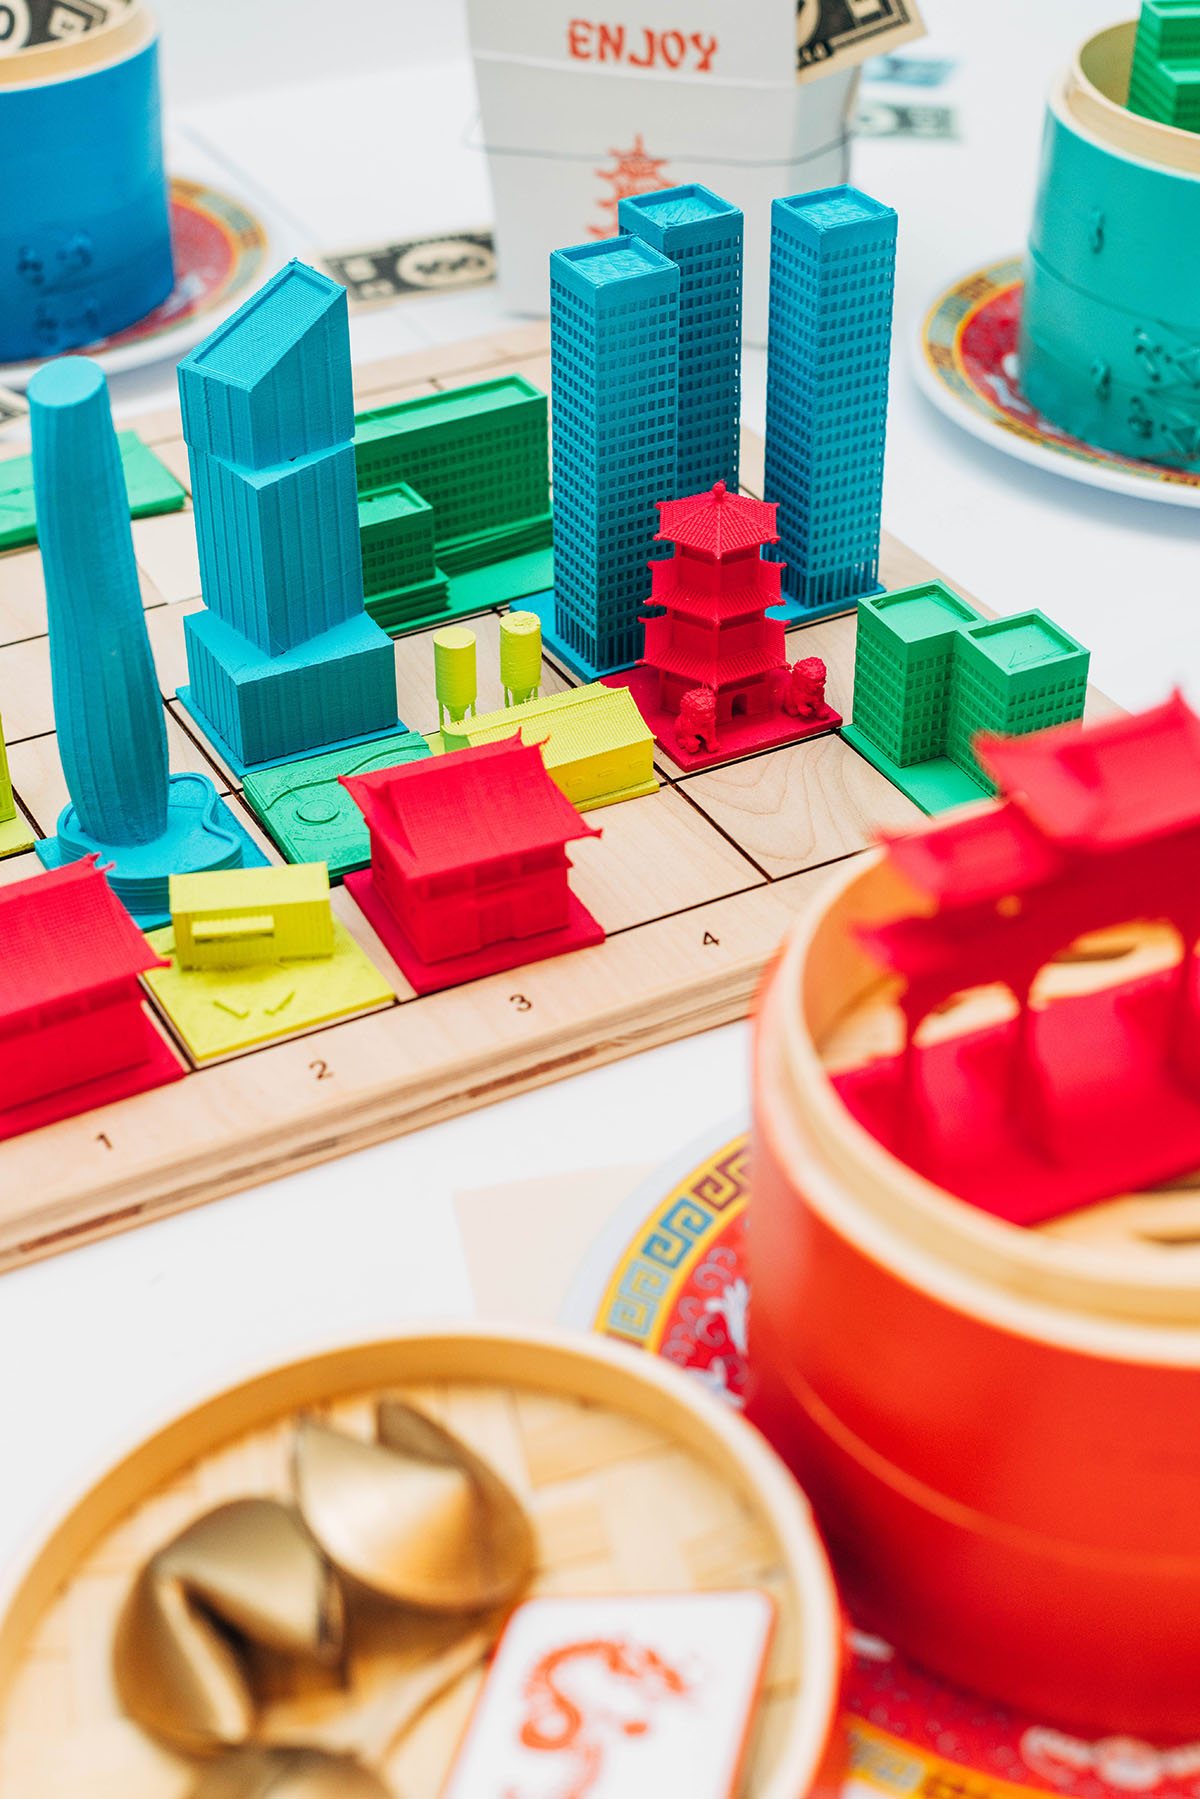 Detail view of board game